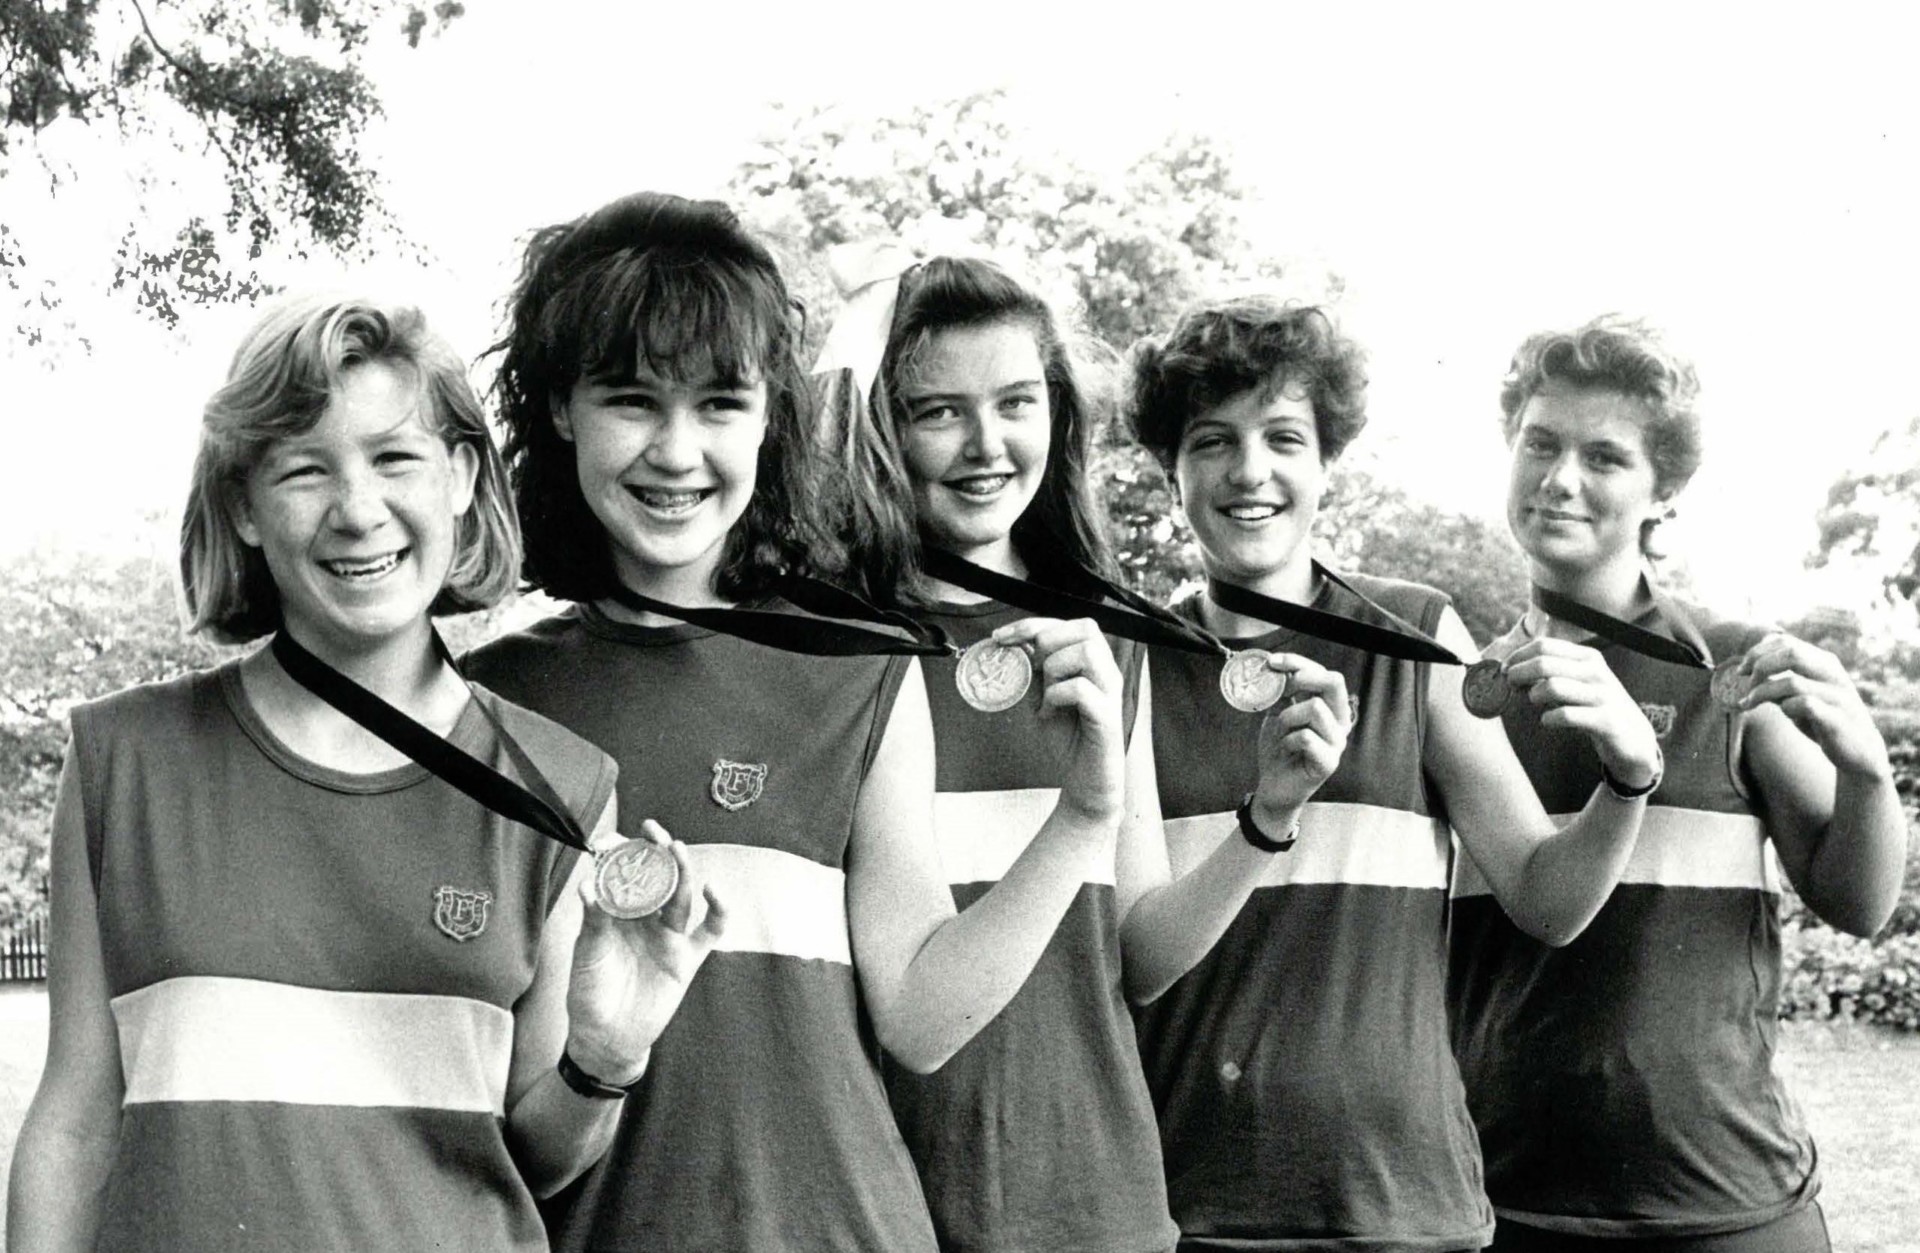 Archive Photo of Fintona's Rowing Squad